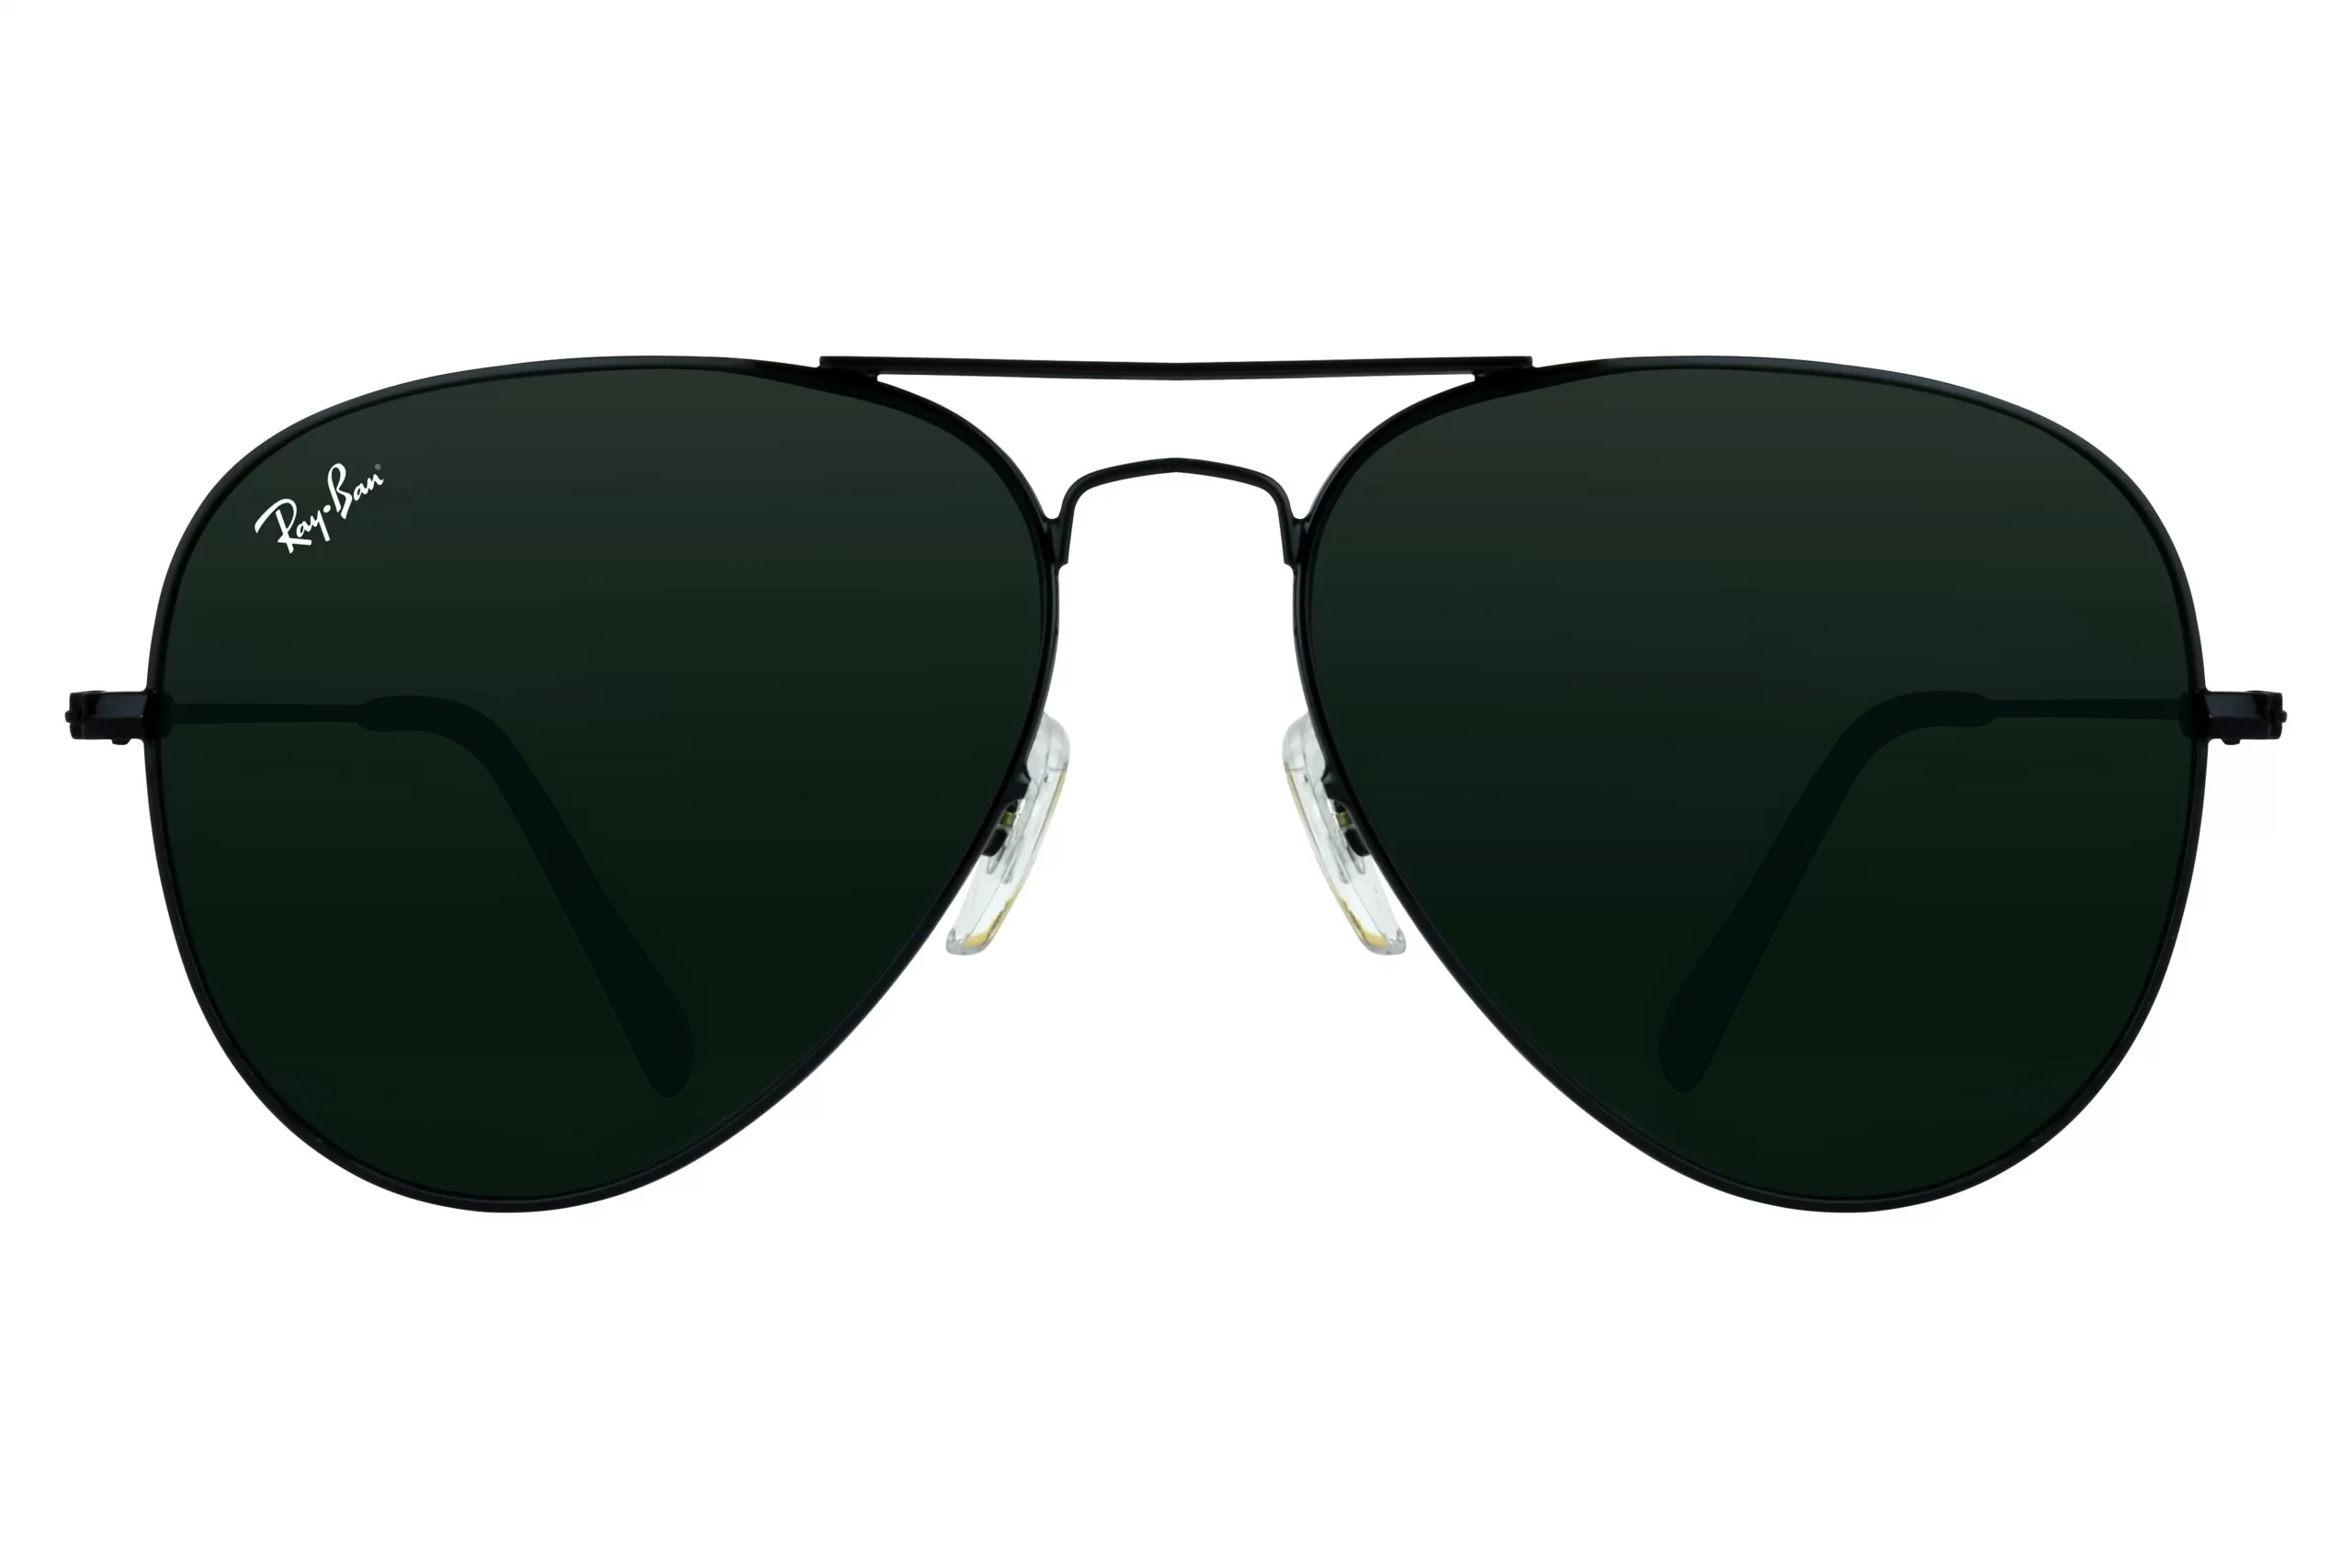 Arriba 37+ imagen ray ban sunglasses made in italy price in pakistan